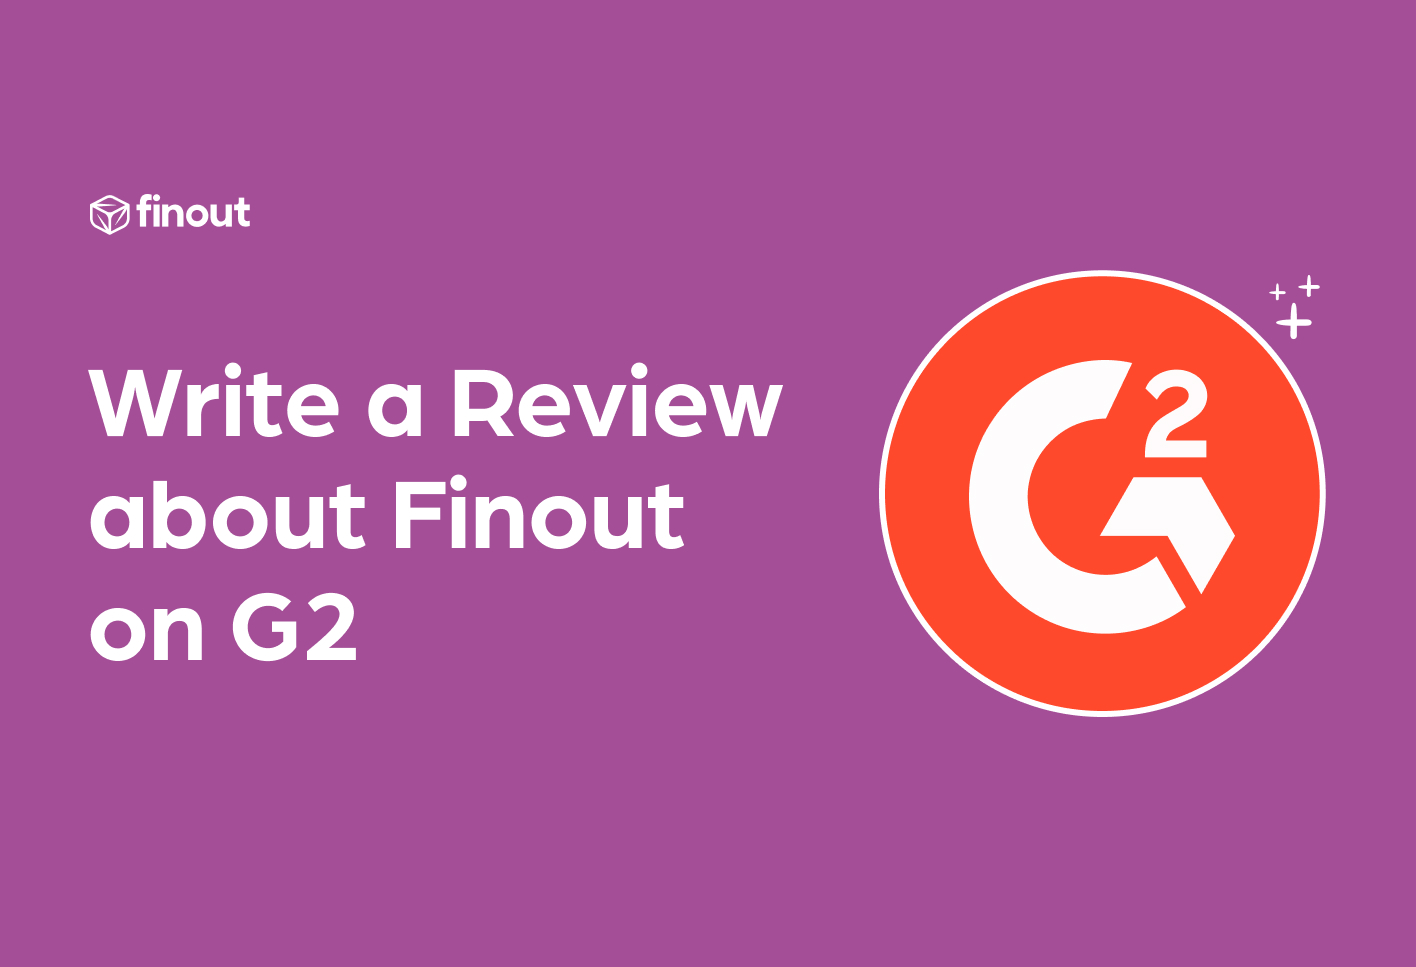 Step by Step guide - G2 review for Finout